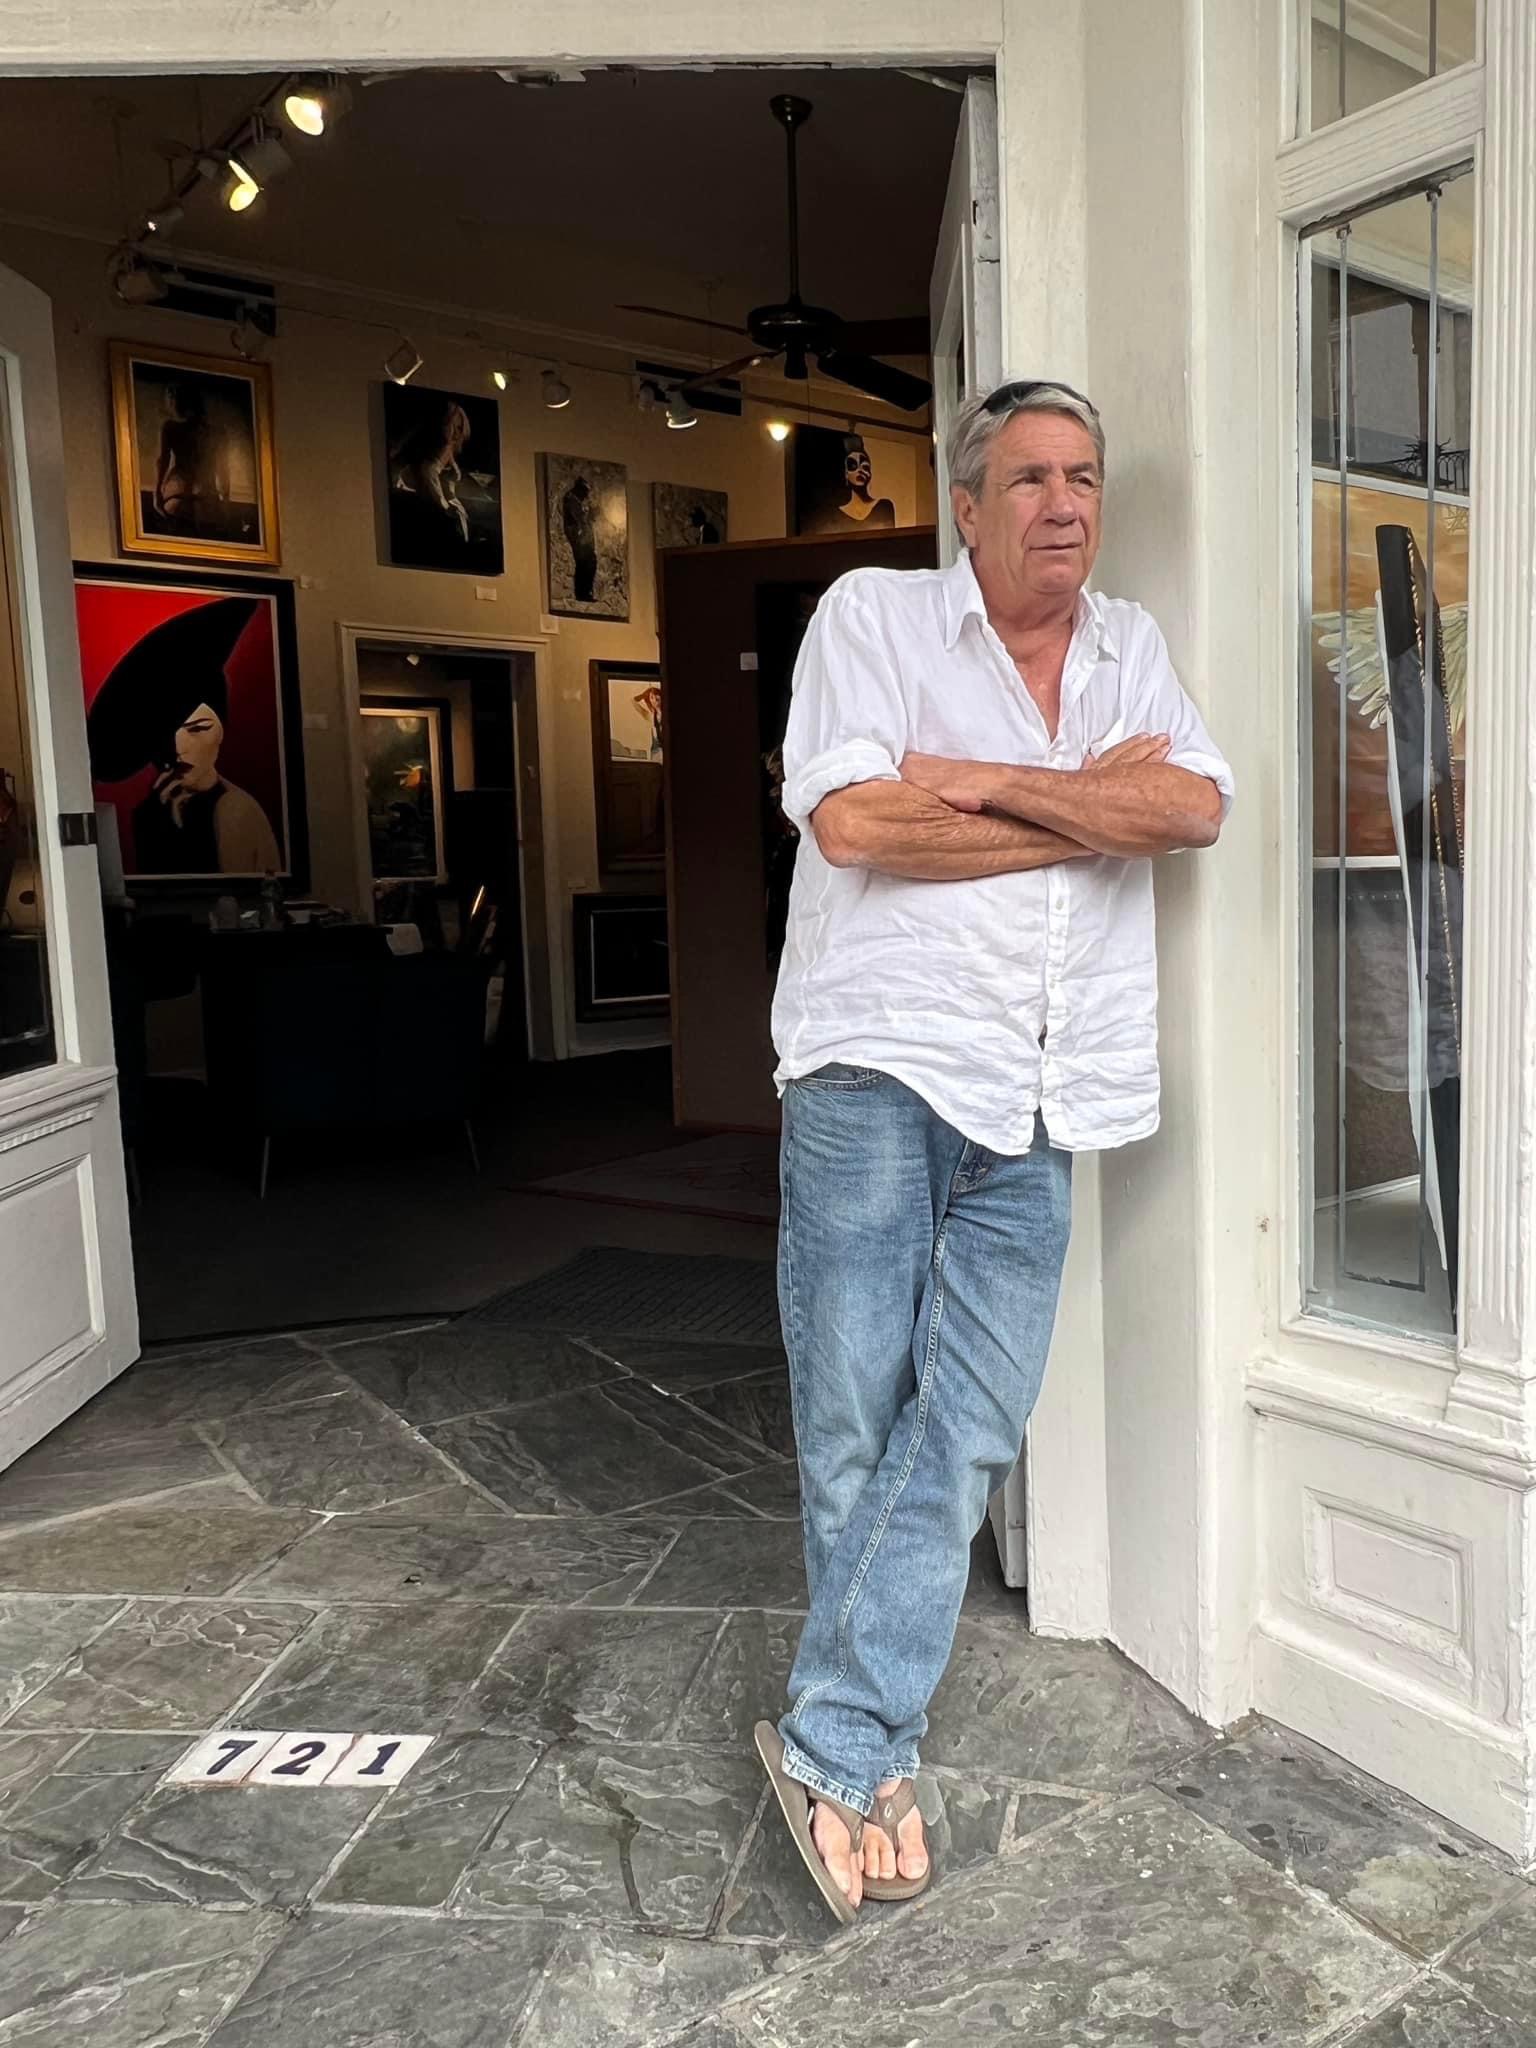 artist Peter O'Neil outside one of his galleries